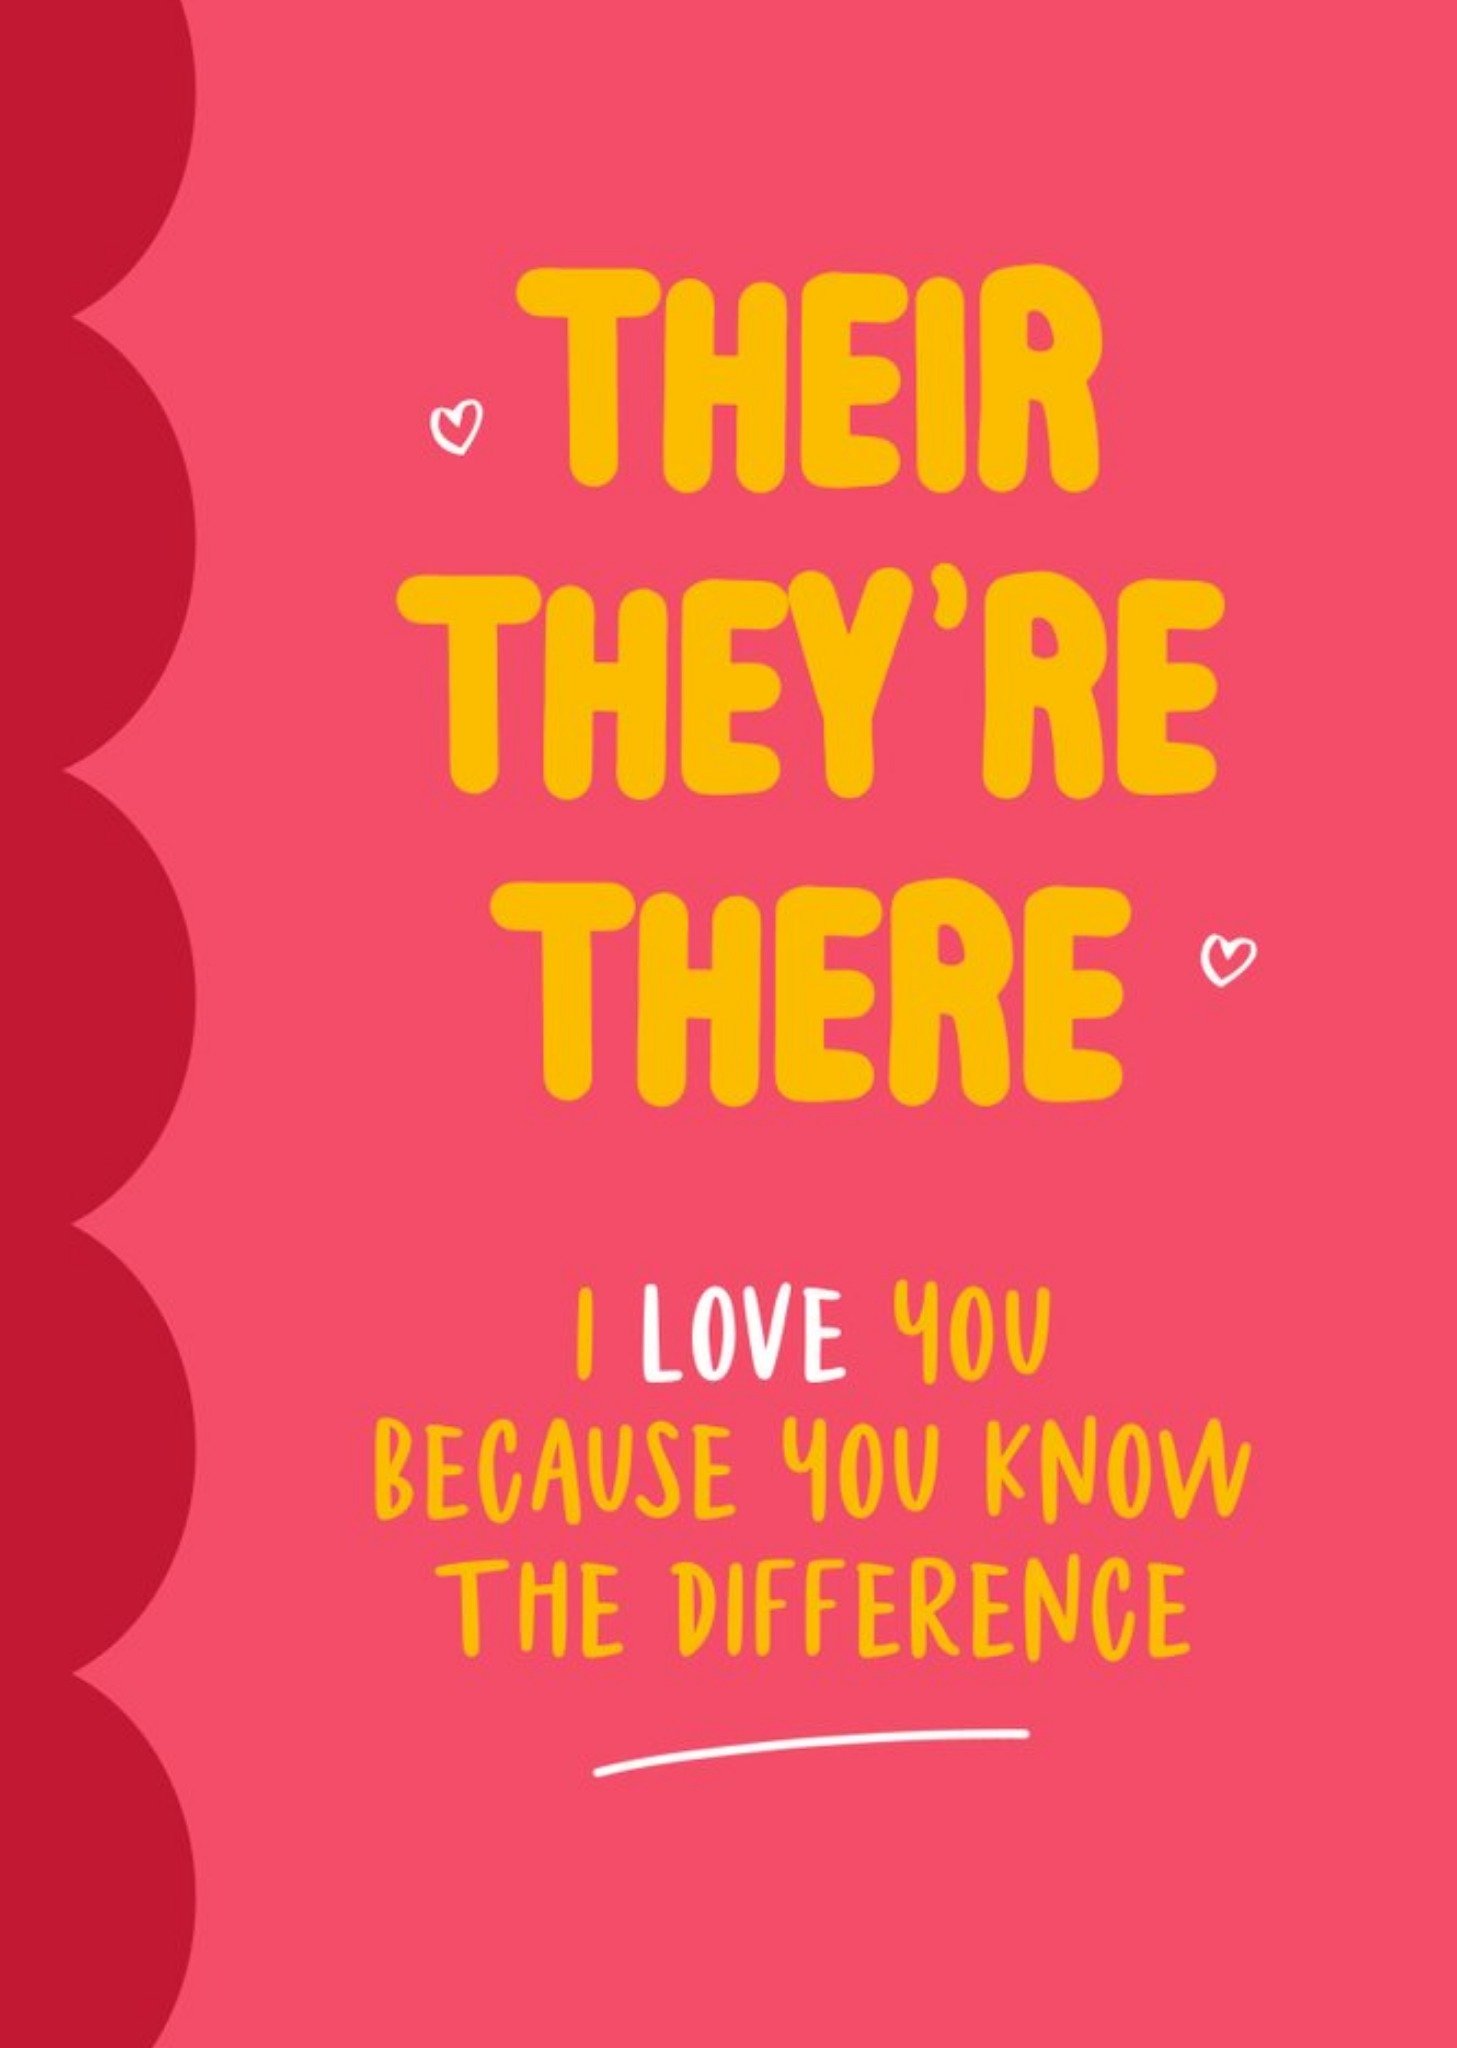 Moonpig Share The Love Funny Typographic You Know The Difference Valentines Day Card Ecard